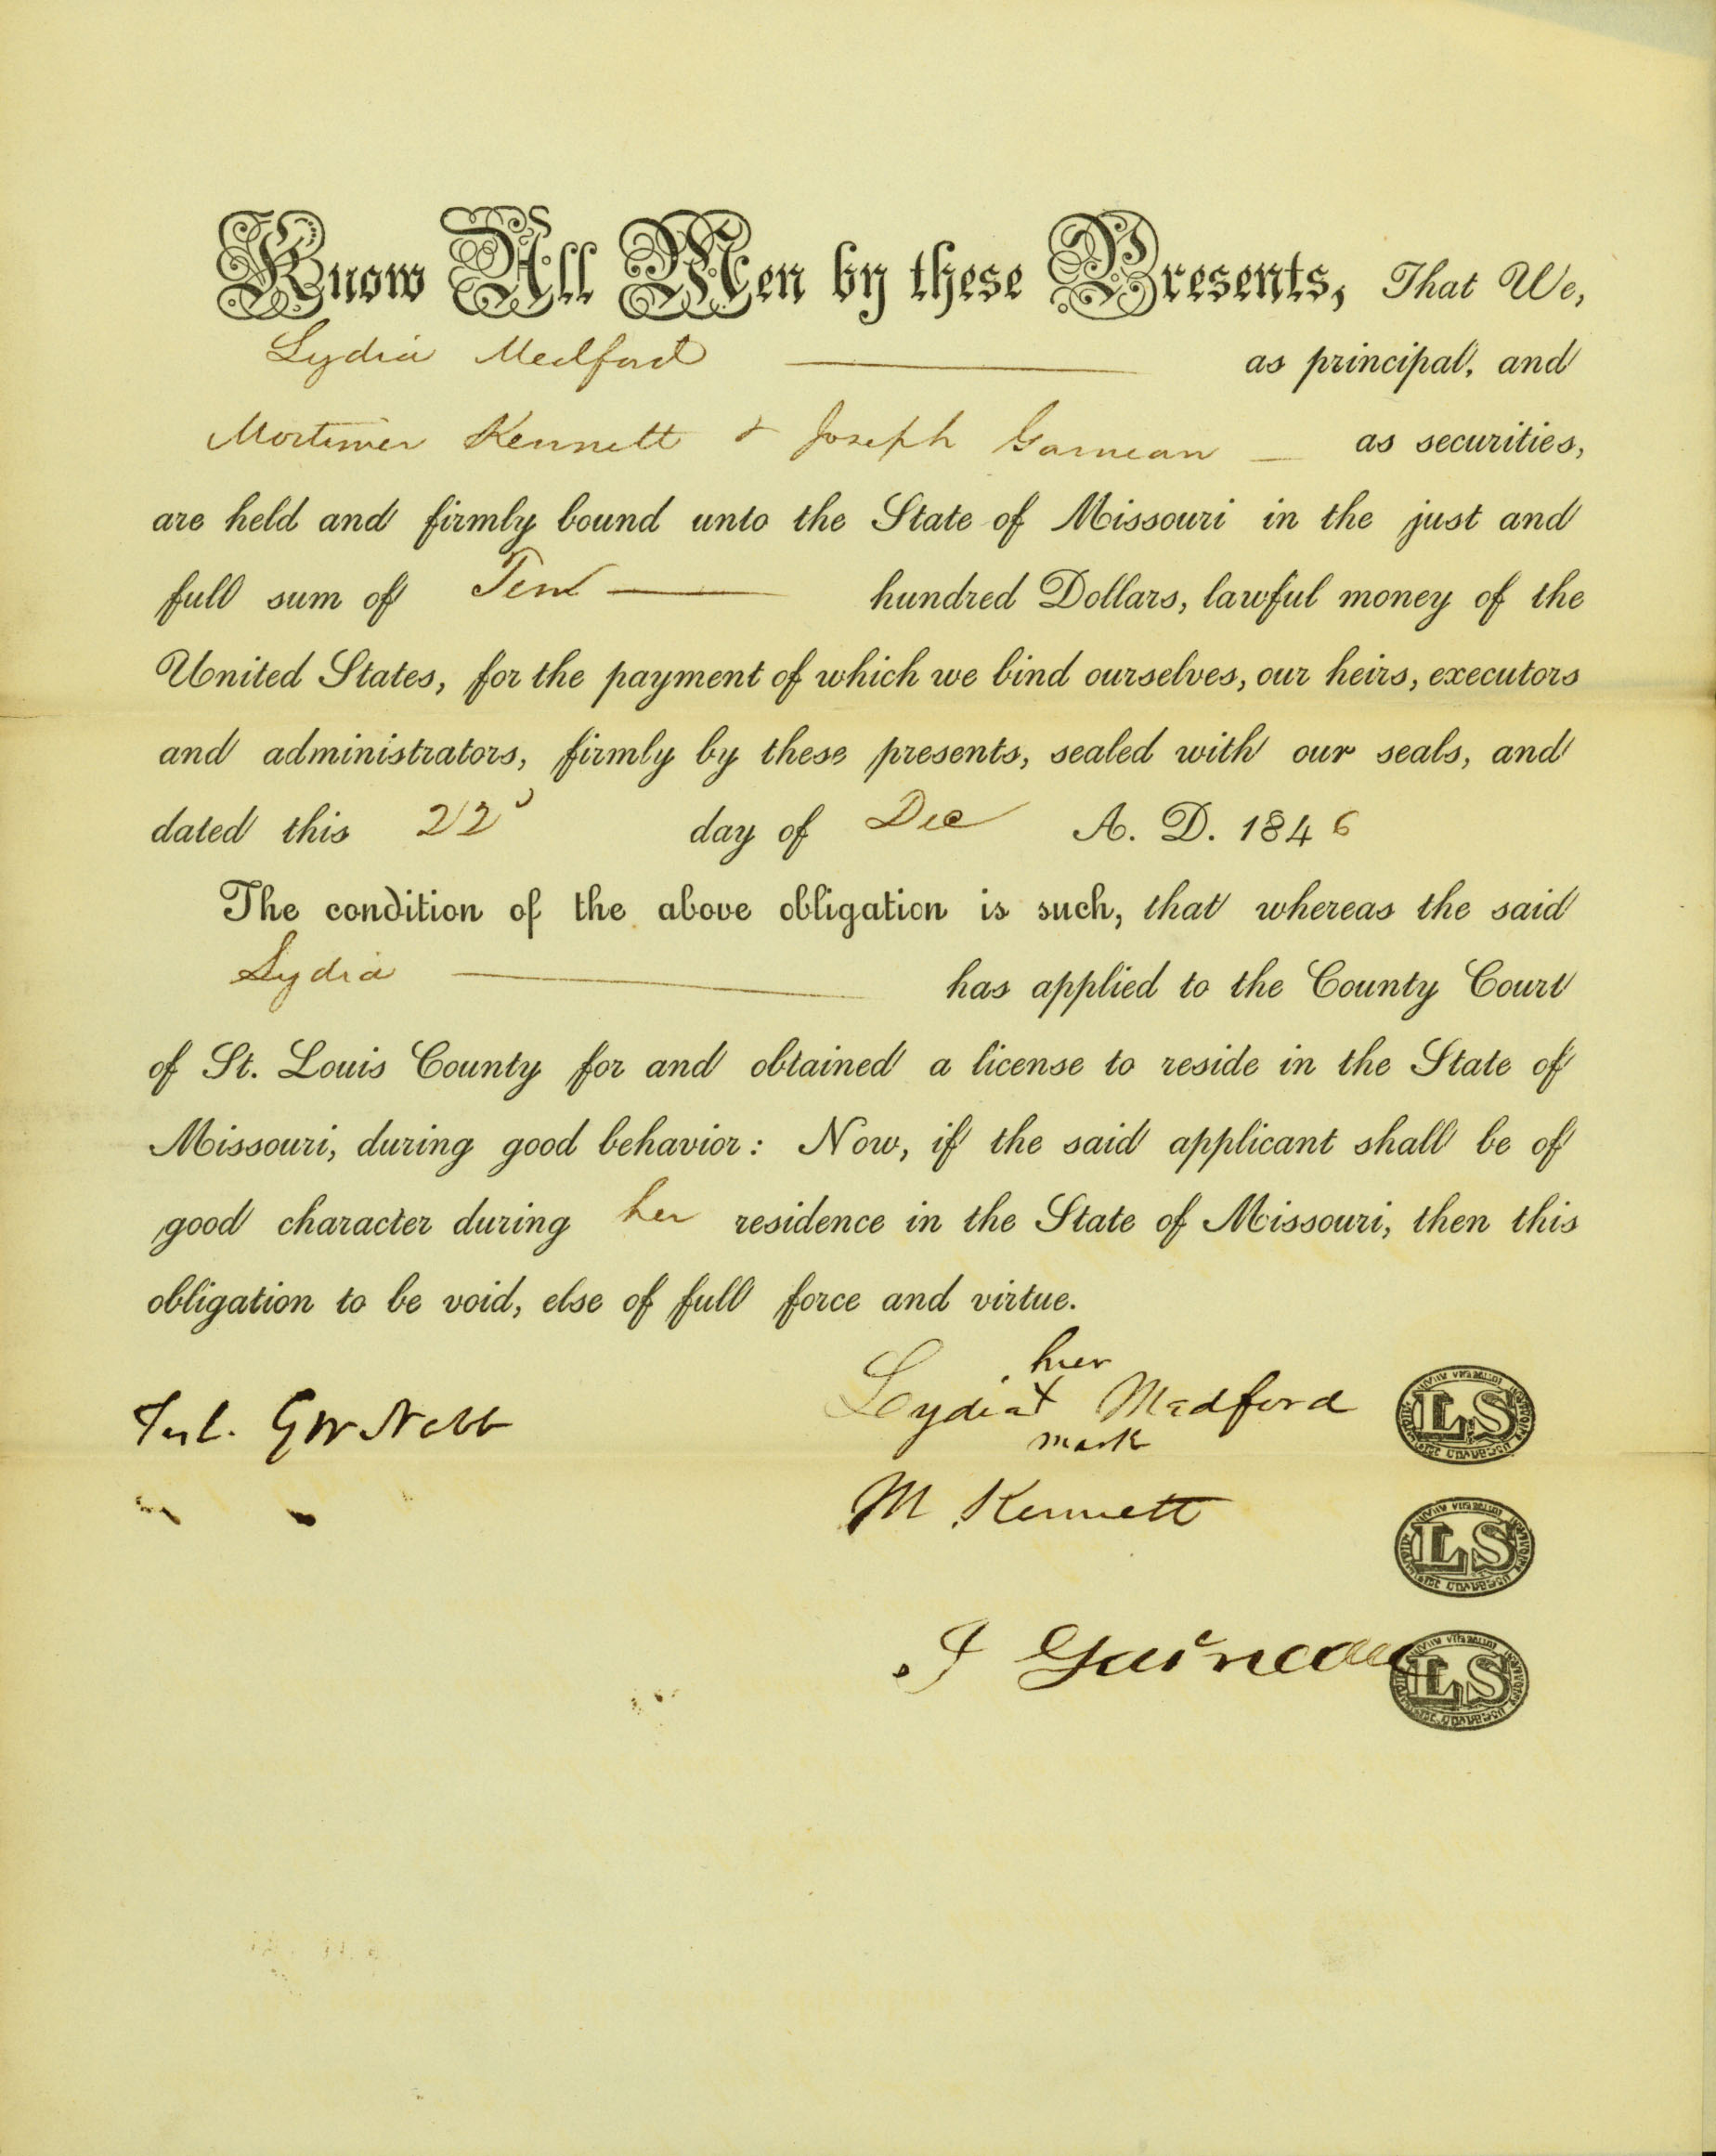 Historic official document allowing a free African American woman entry into Missouri.